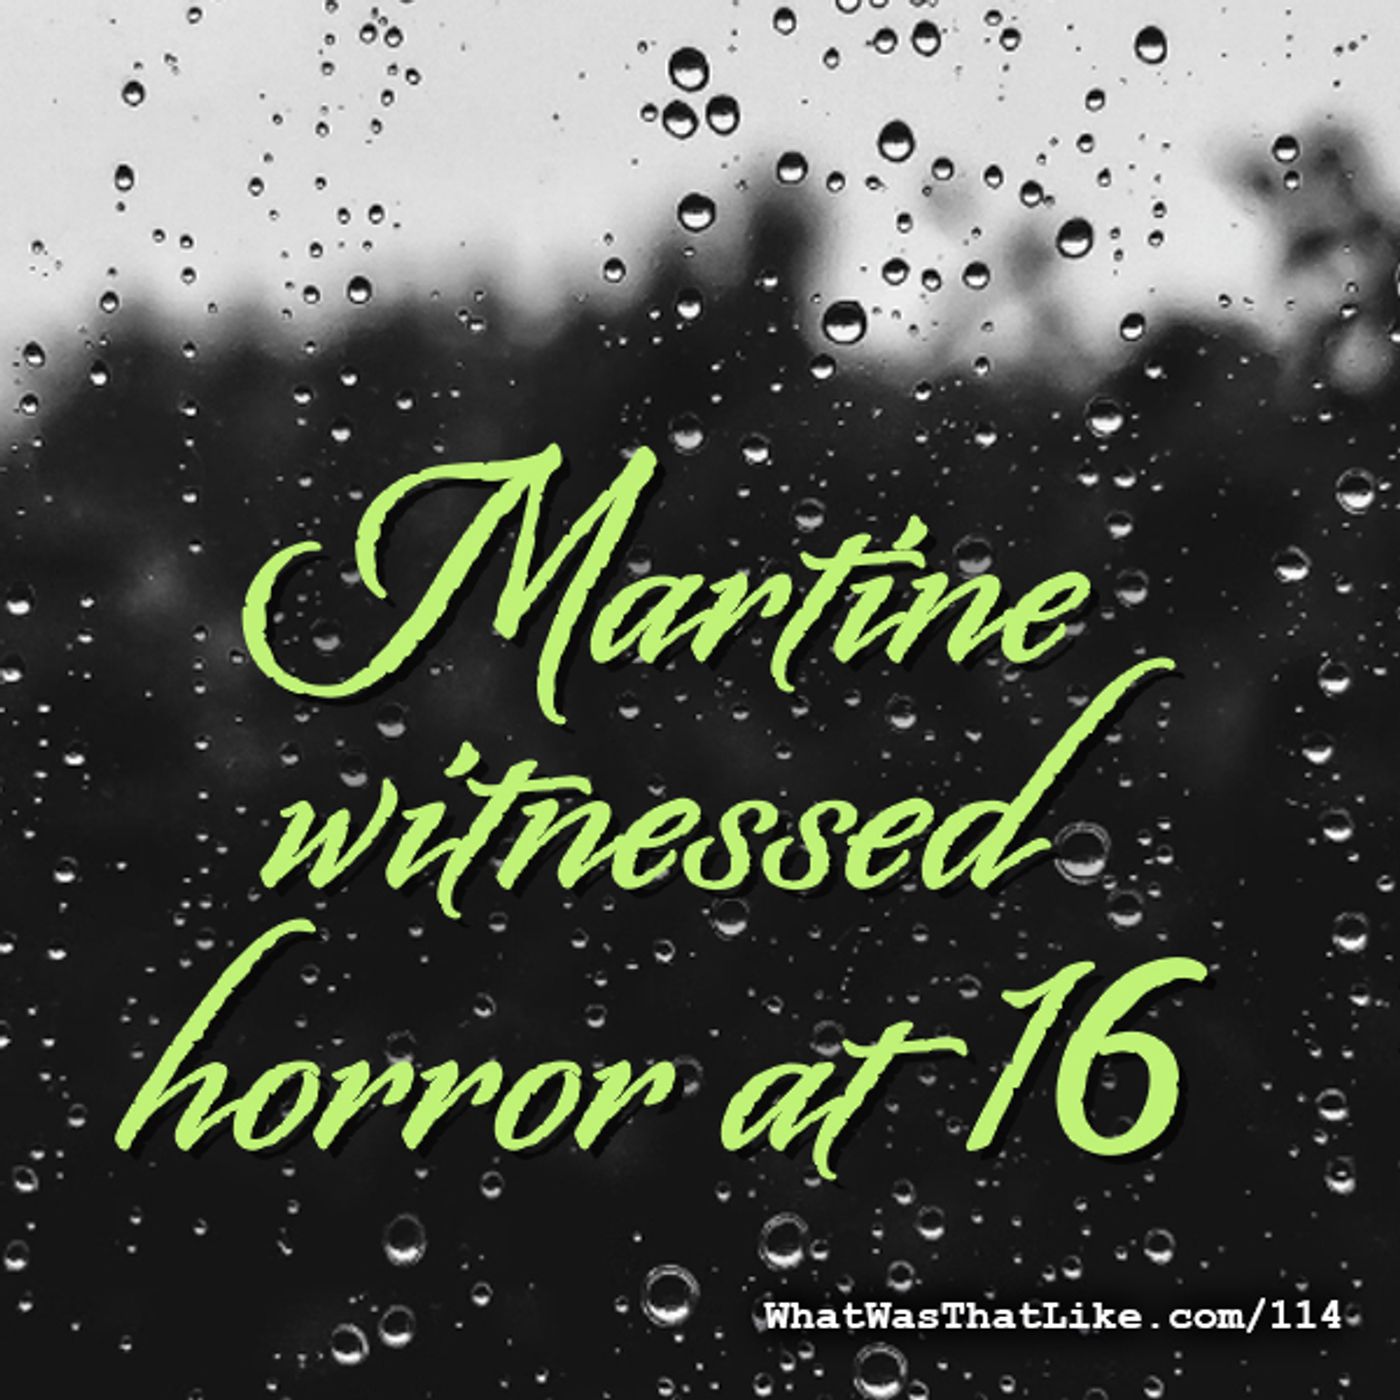 Martine witnessed horror at 16 by What Was That Like